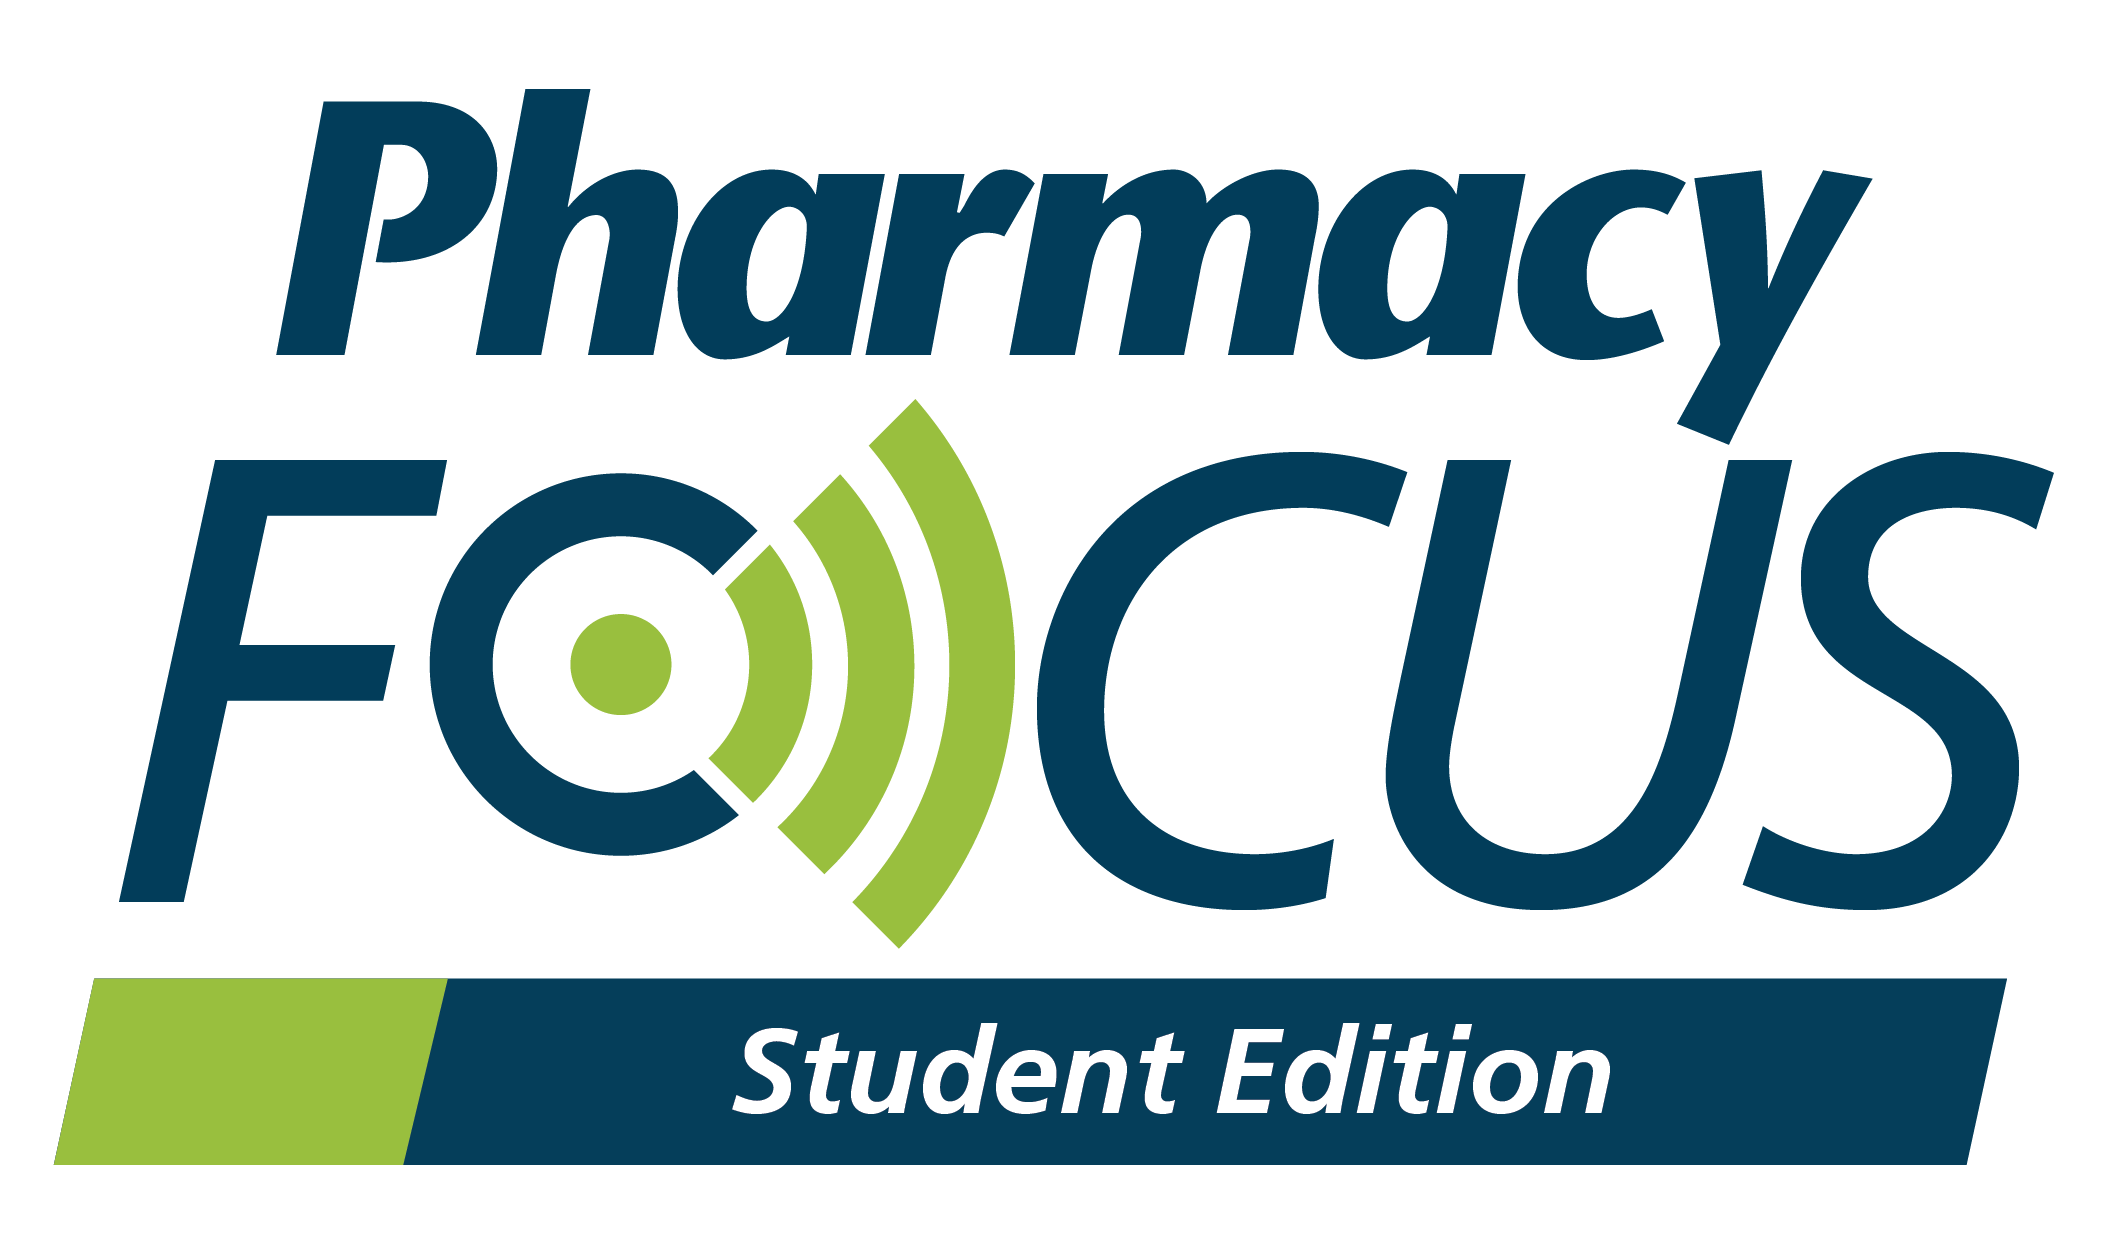 Pharmacy Focus: Student Edition - Accelerating Success: Western University of Health Sciences' 3.5-Year Program